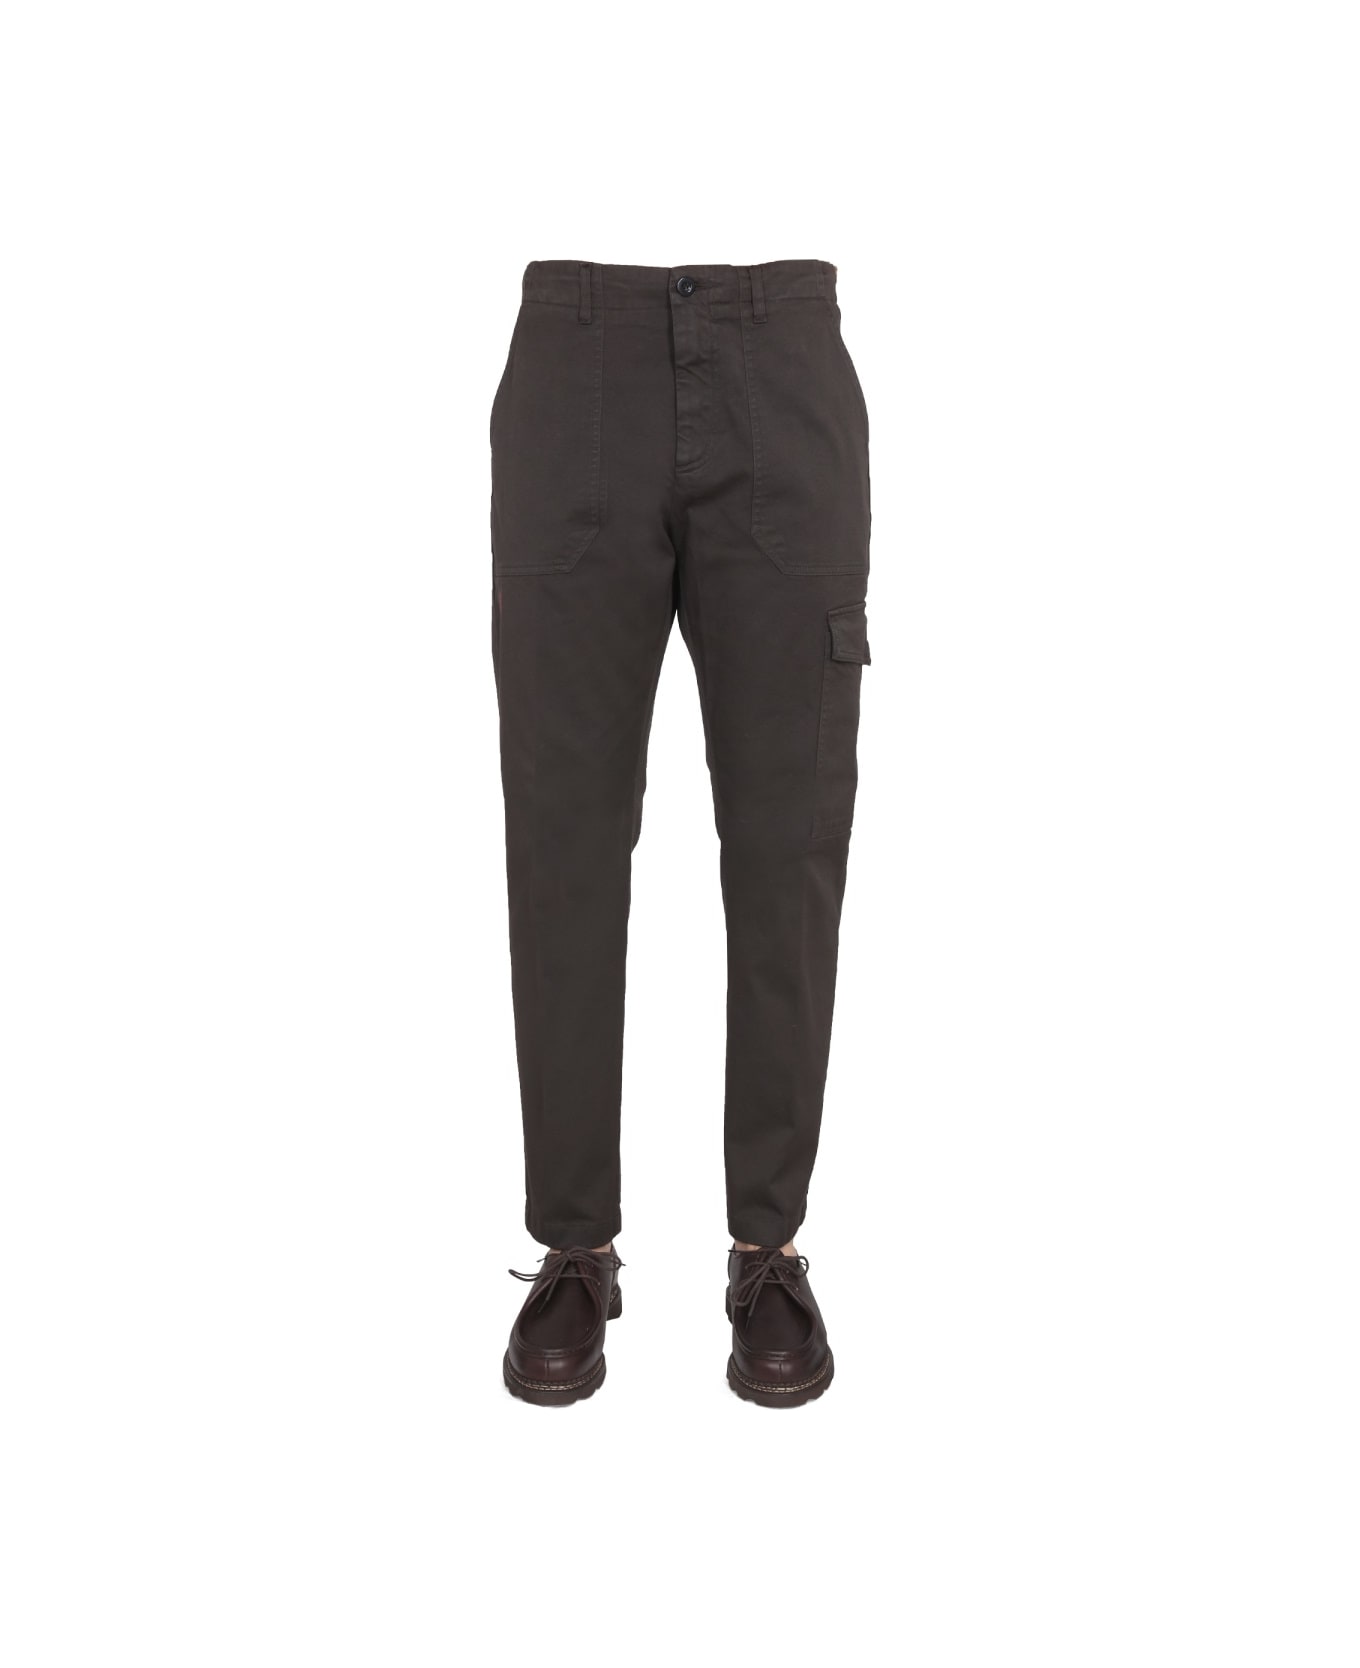 Department Five Pants Out - BROWN